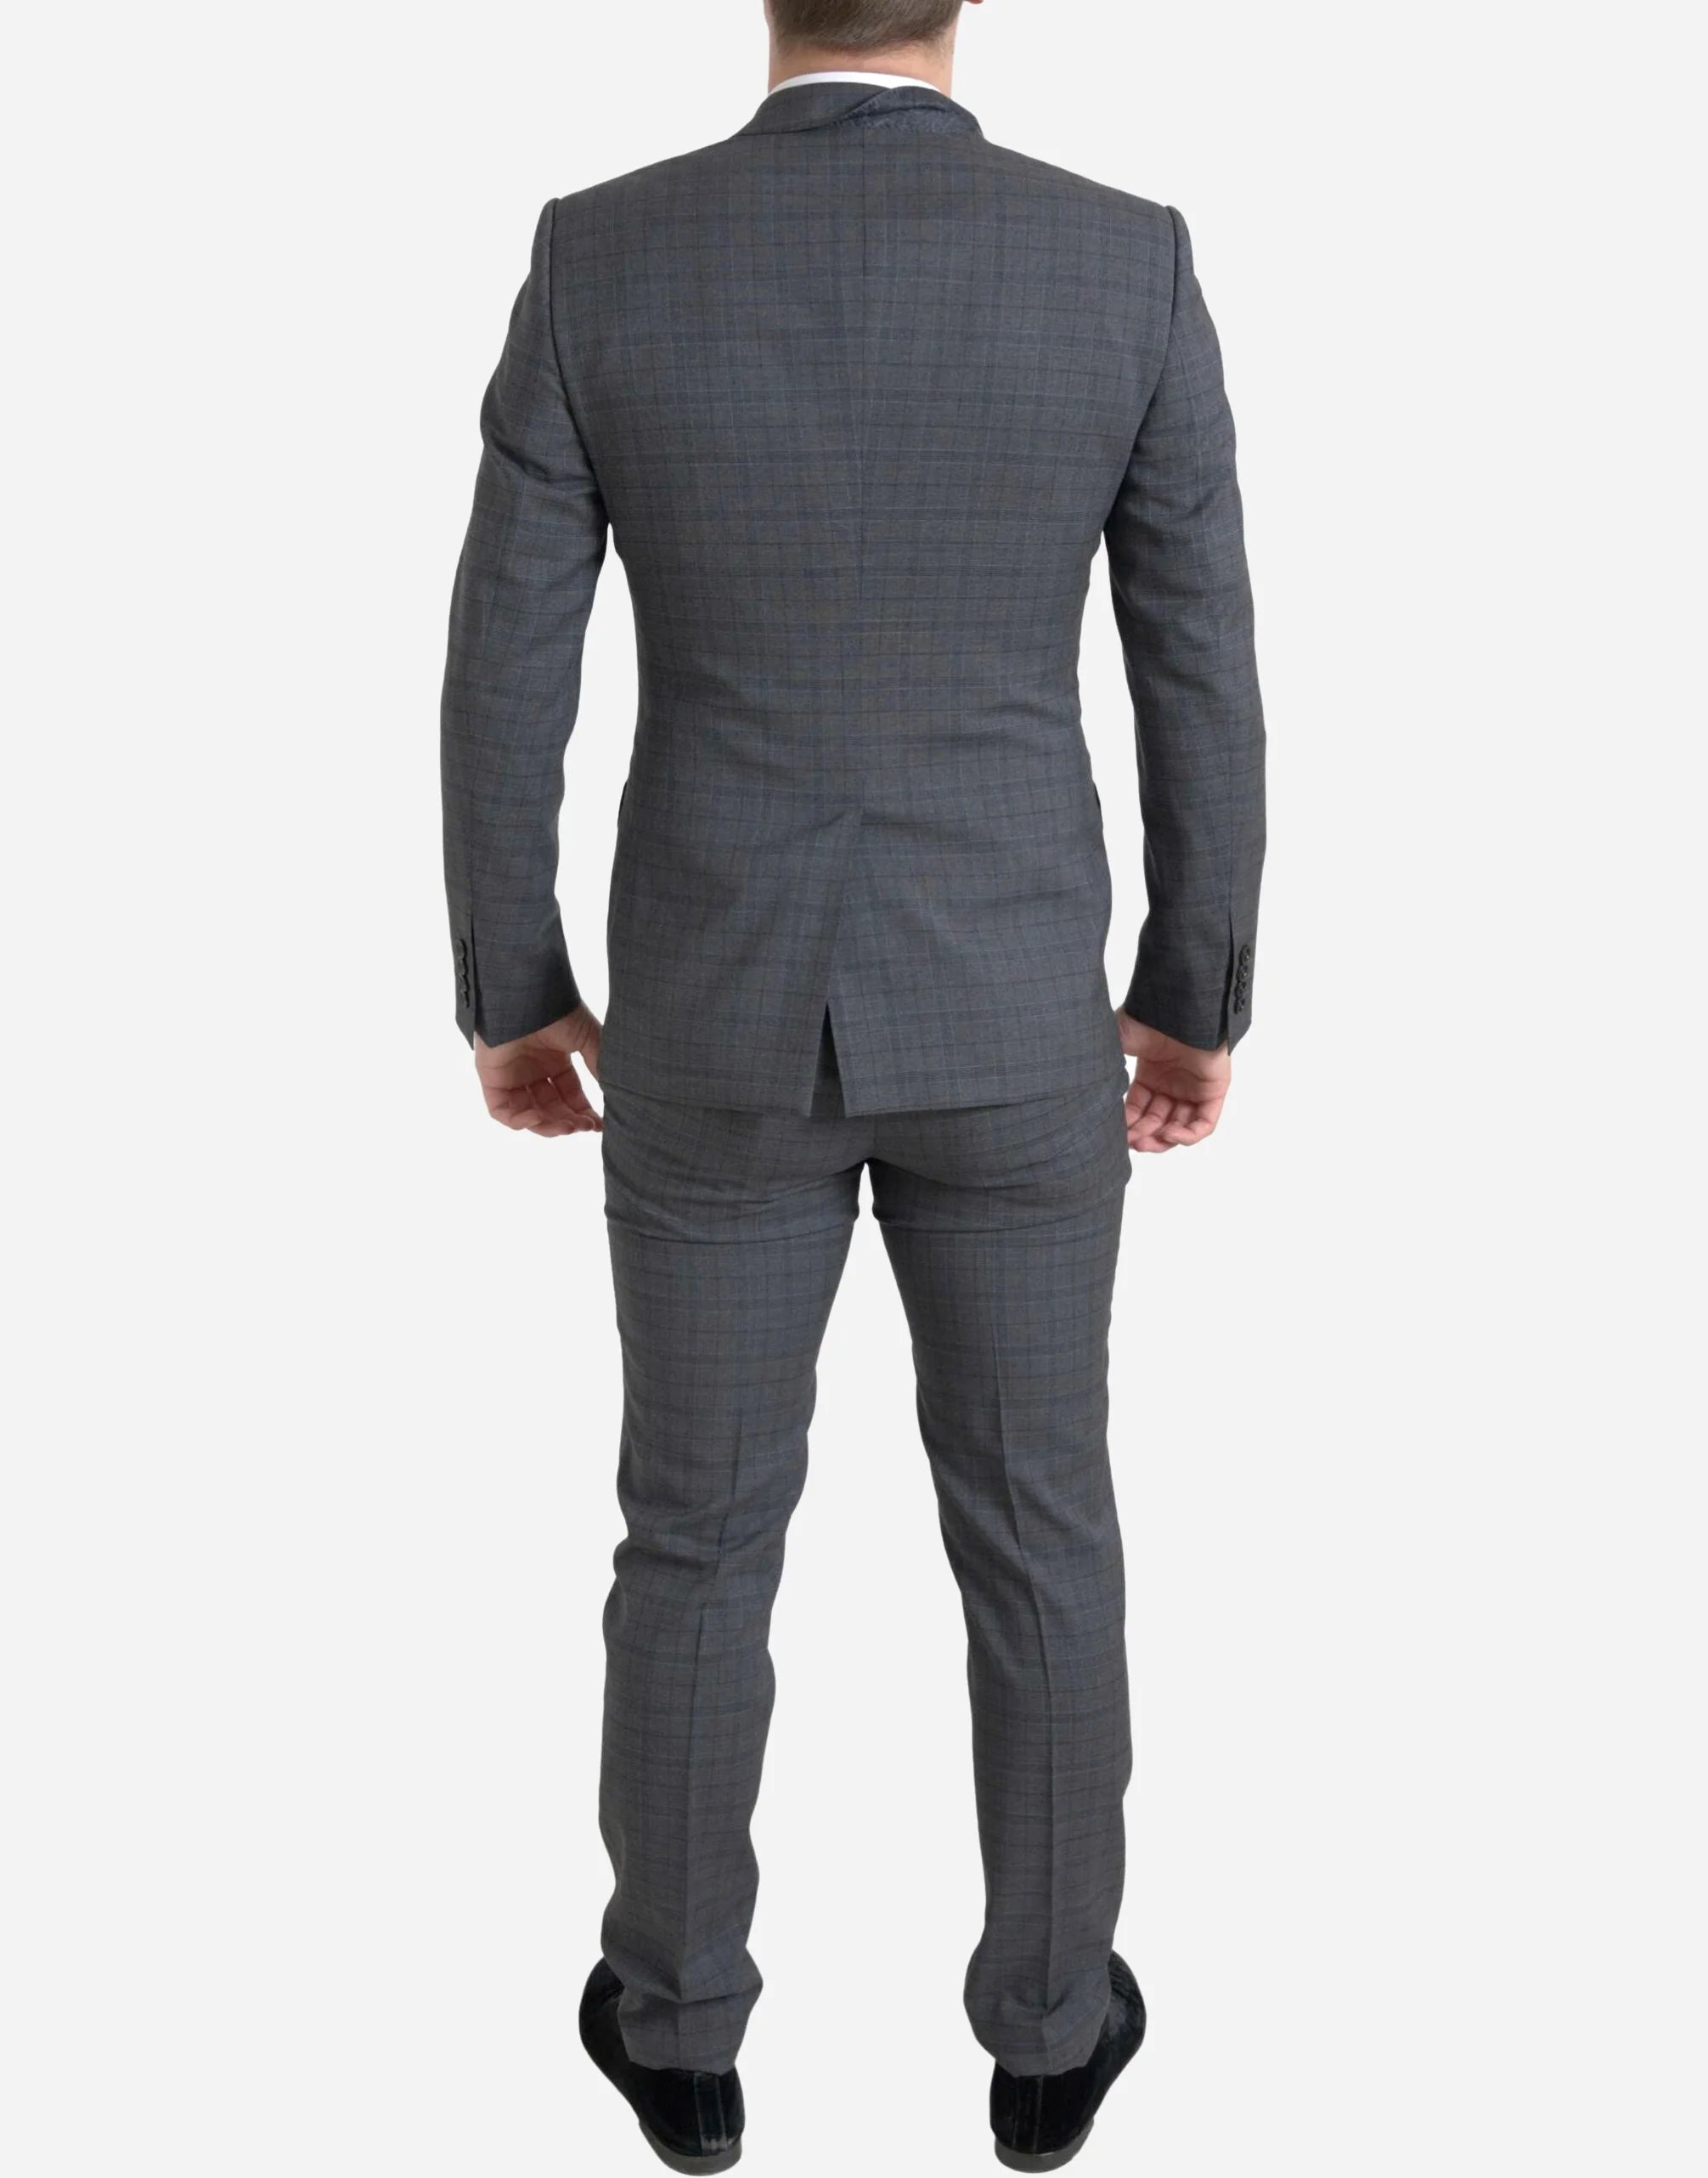 Two-Piece Single Breasted Martini Suit